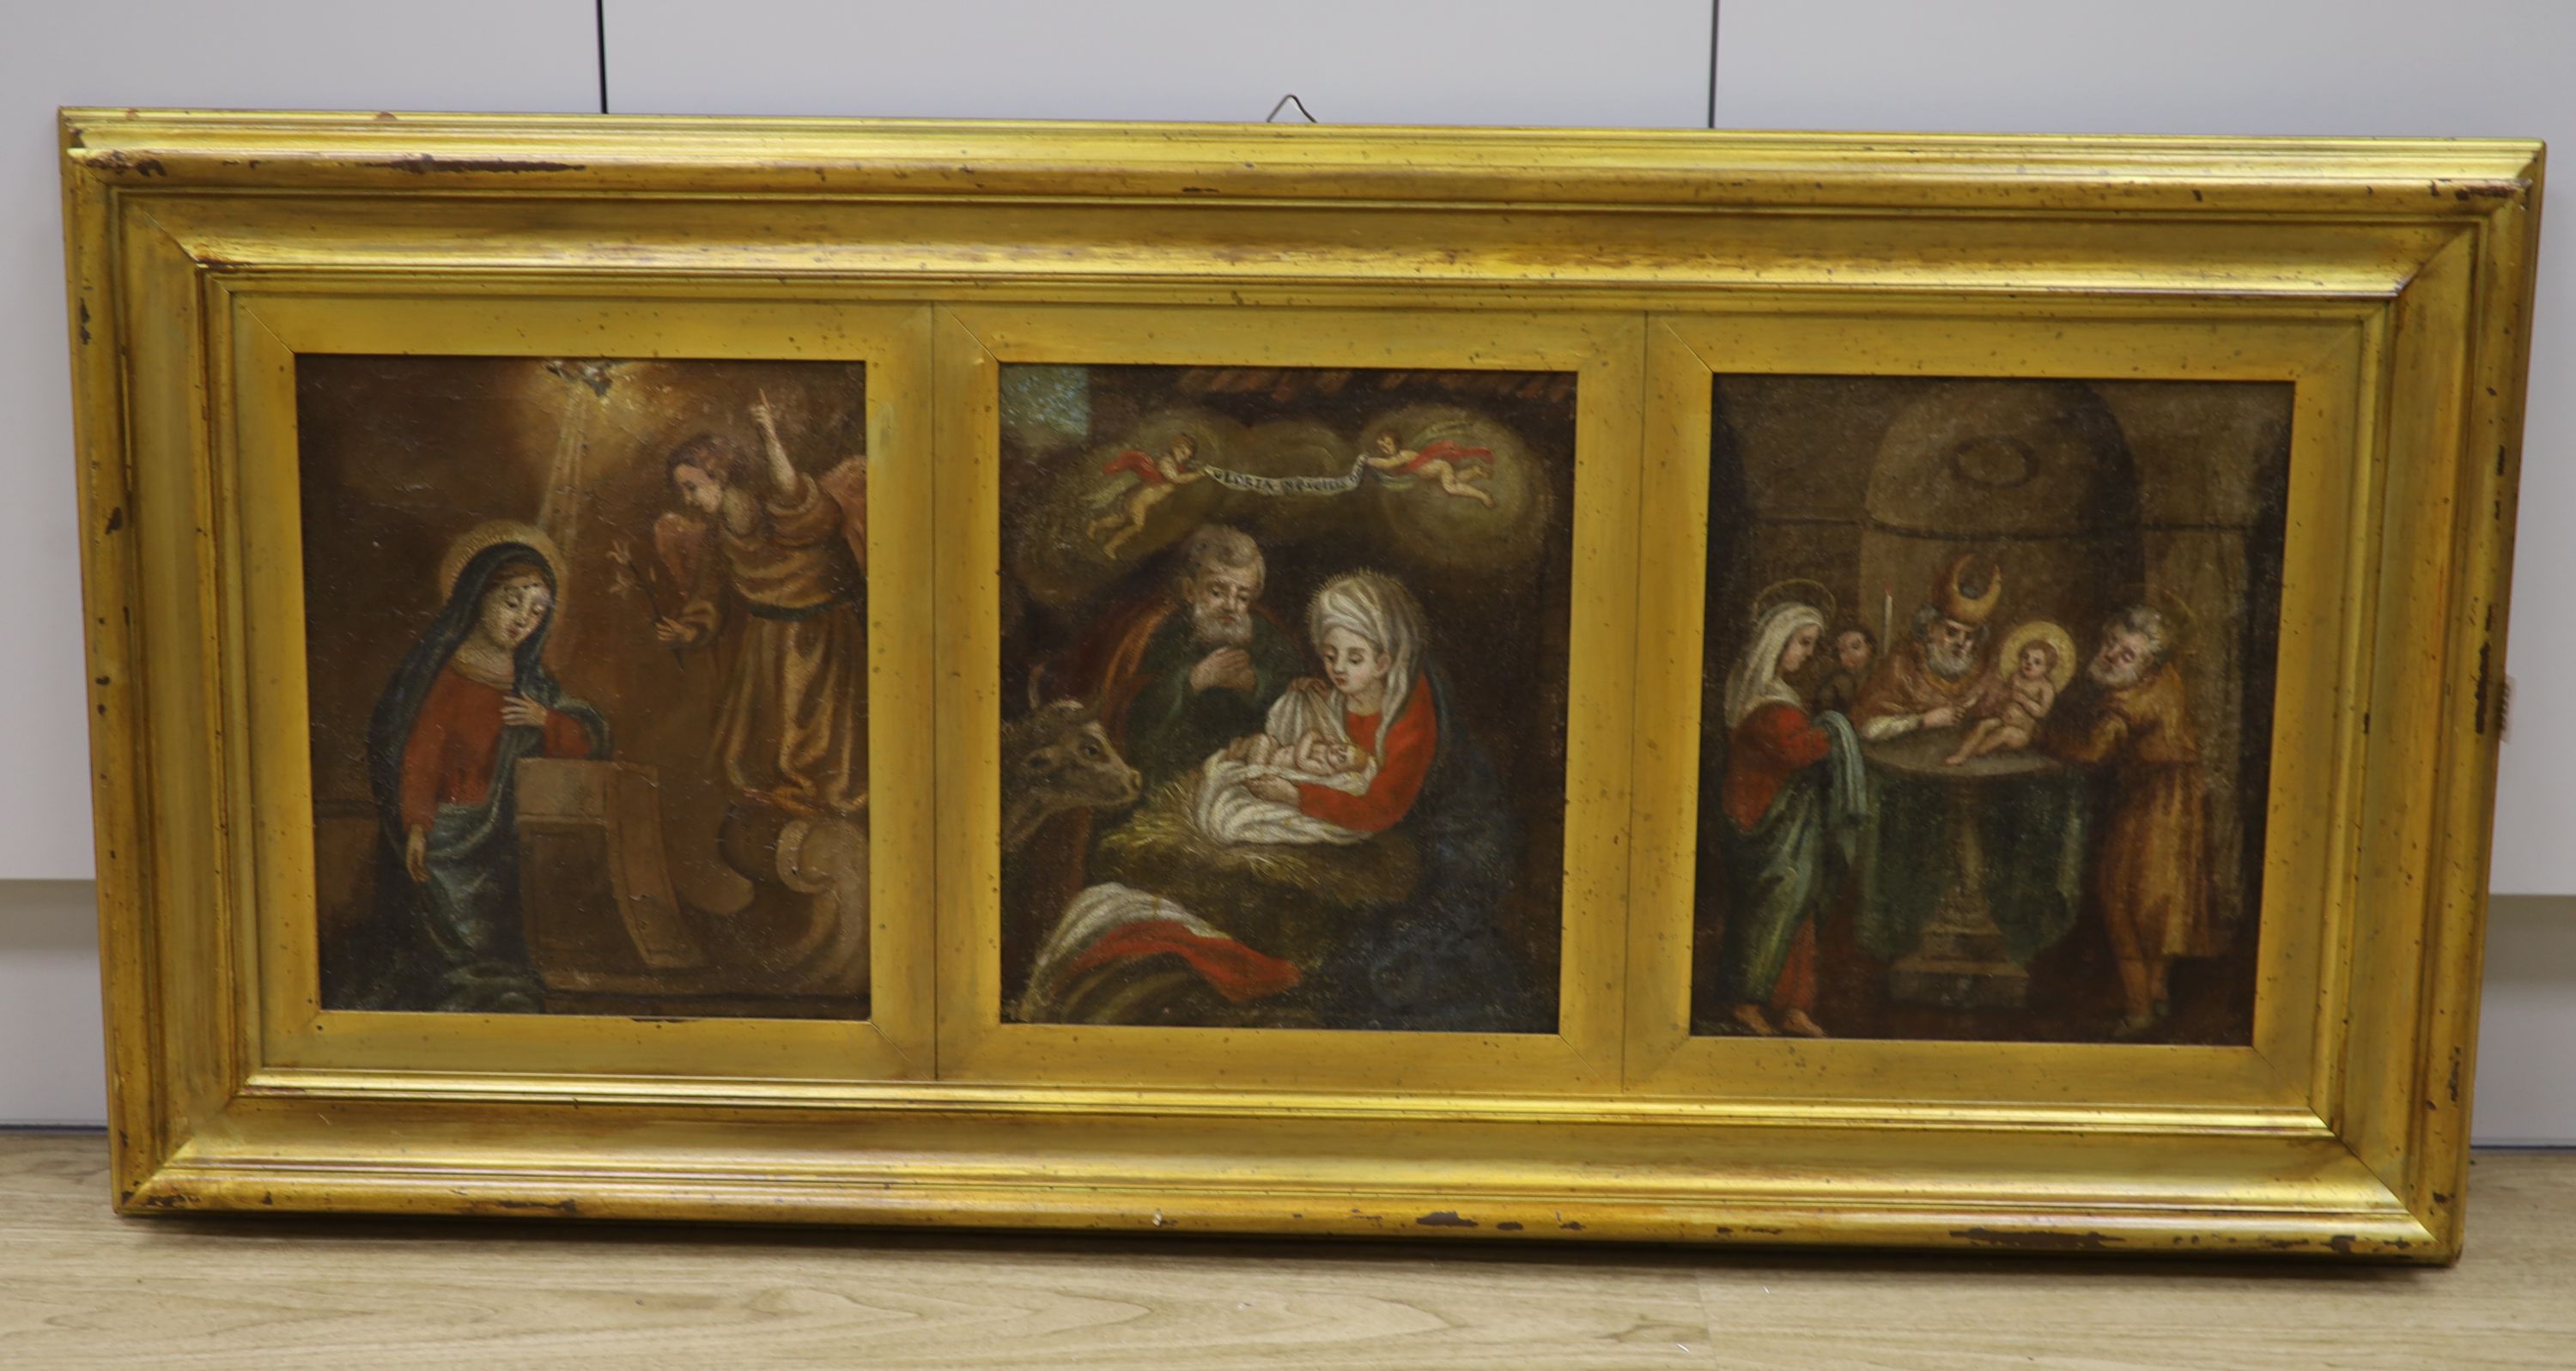 19th century European school, a triptych of Christian narratives, oil on canvas, individually measuring 31 x 26 cm, presented as one in a later gilt frame